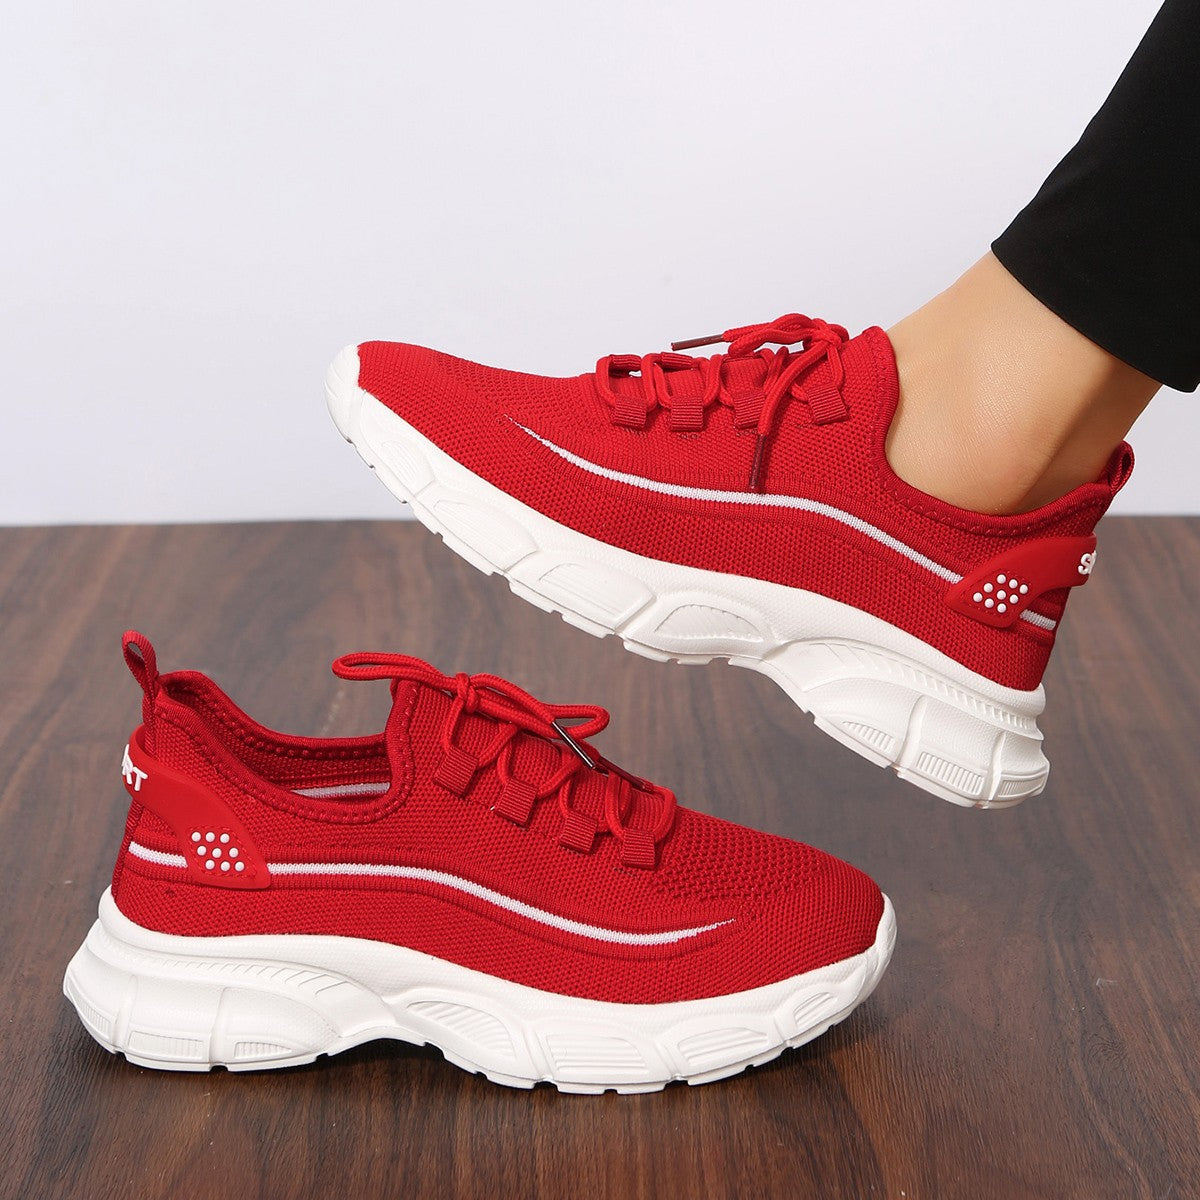 Women's Fashion Casual Exercise Flyknit Shoes - Breathable Lightweight Hiking Sneakers - Carvan Mart